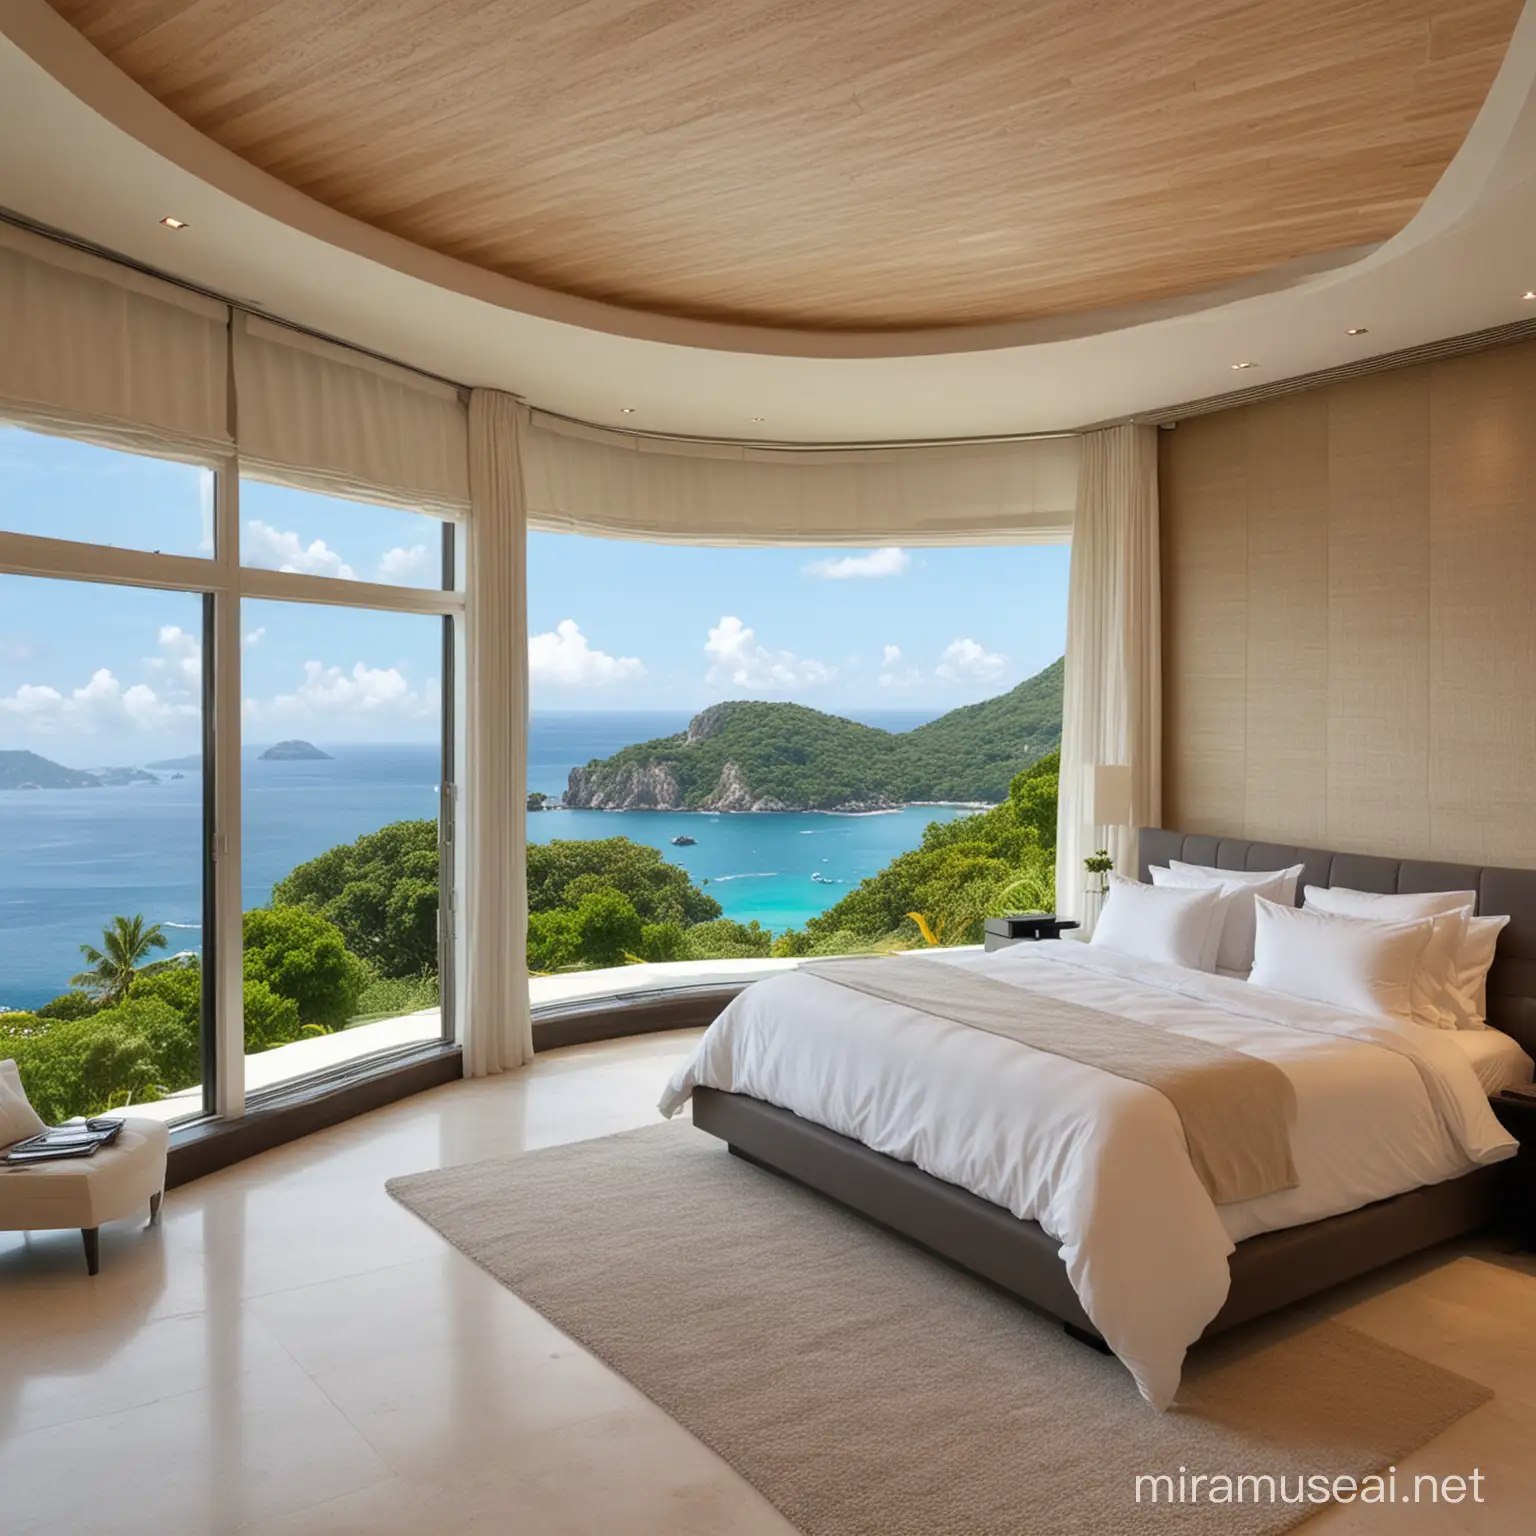 very expensive looking bedroom with view to island
